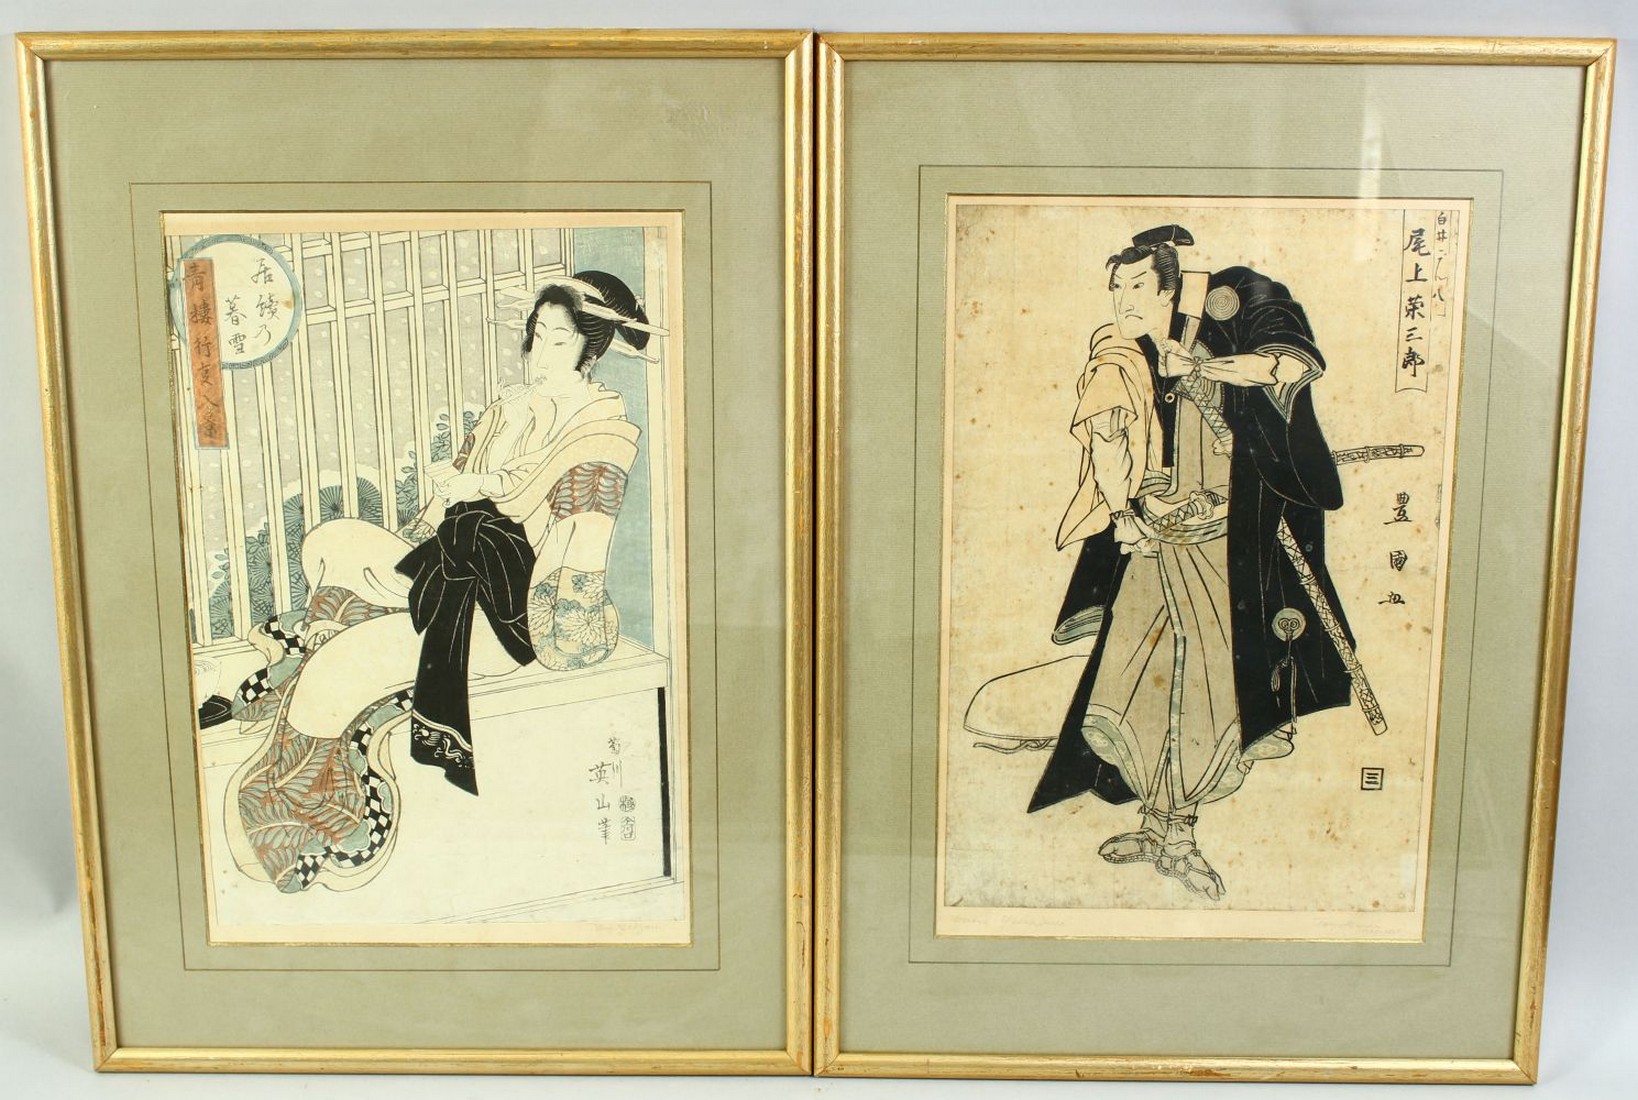 TWO JAPANESE WOODBLOCK PRINTS, one depicting a male actor with ceremonial robes and swords, the